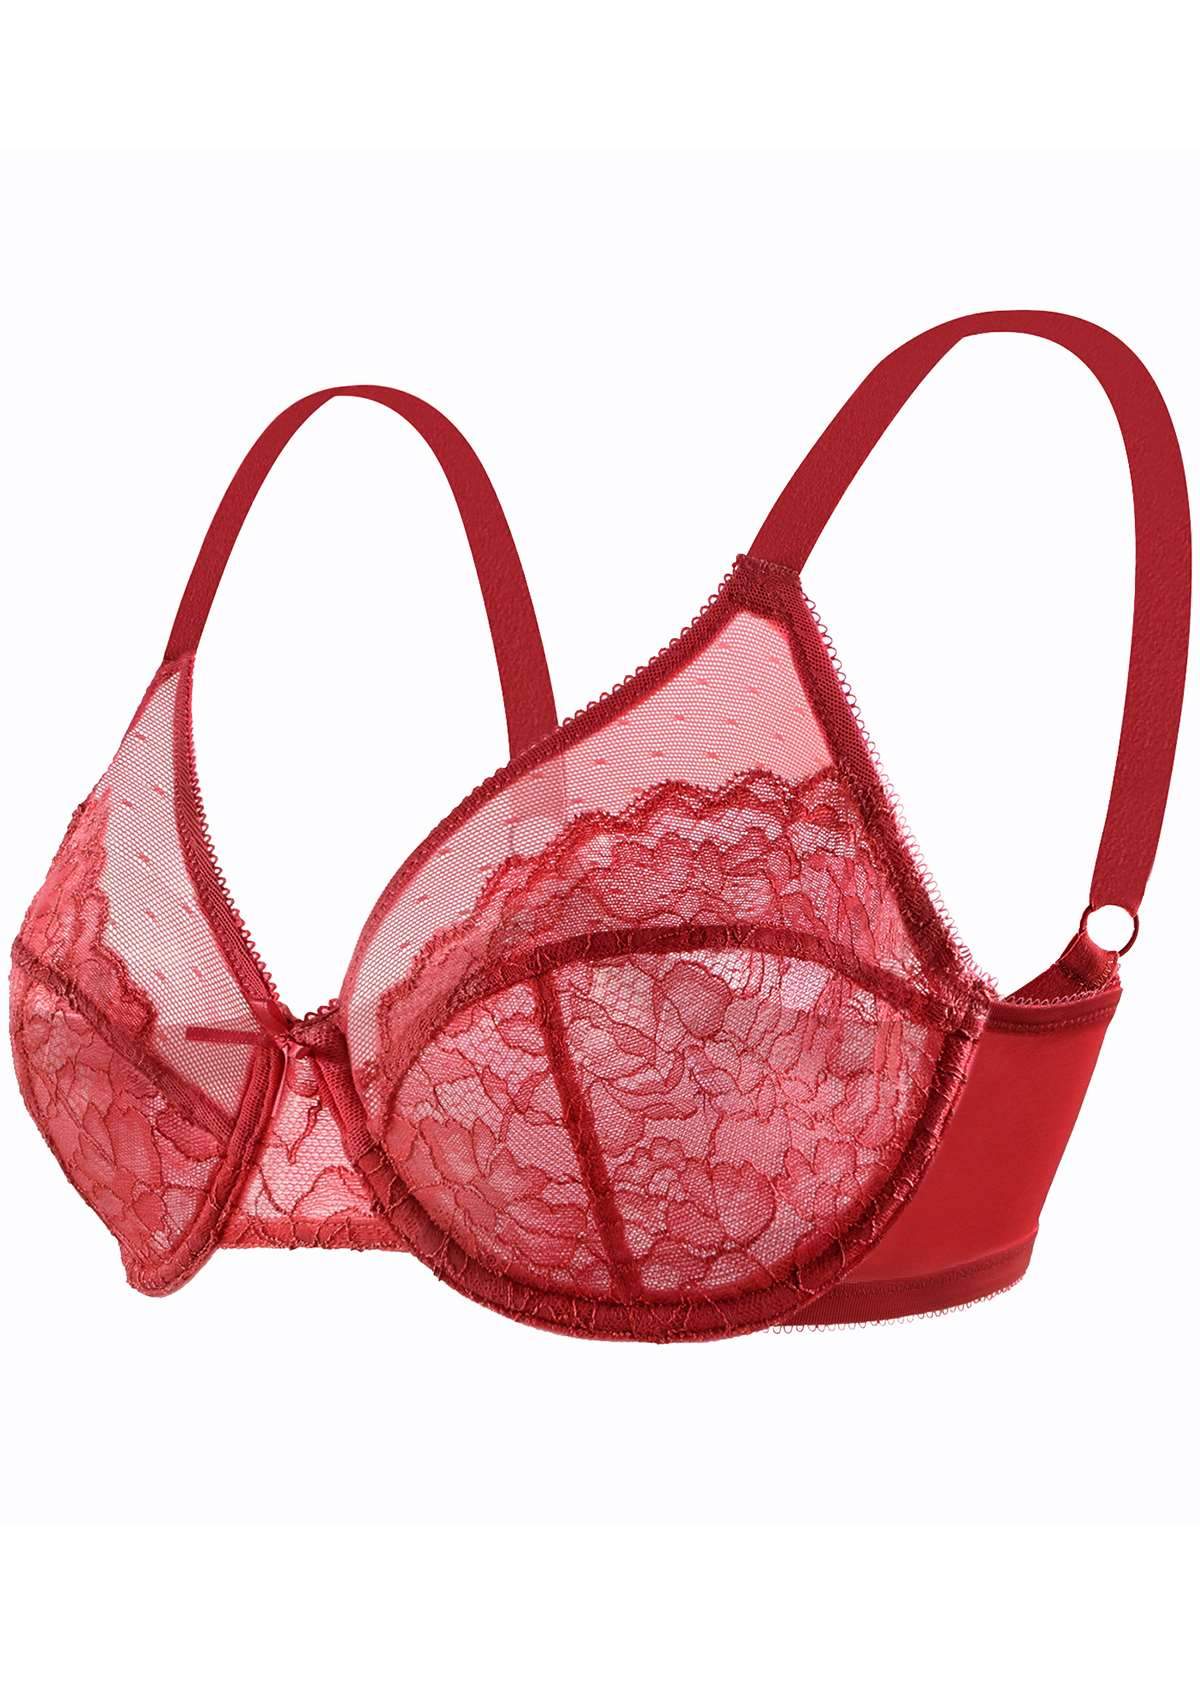 HSIA Enchante Full Support Lace Underwire Bra: Ideal For Big Breasts - Crimson / 34 / D